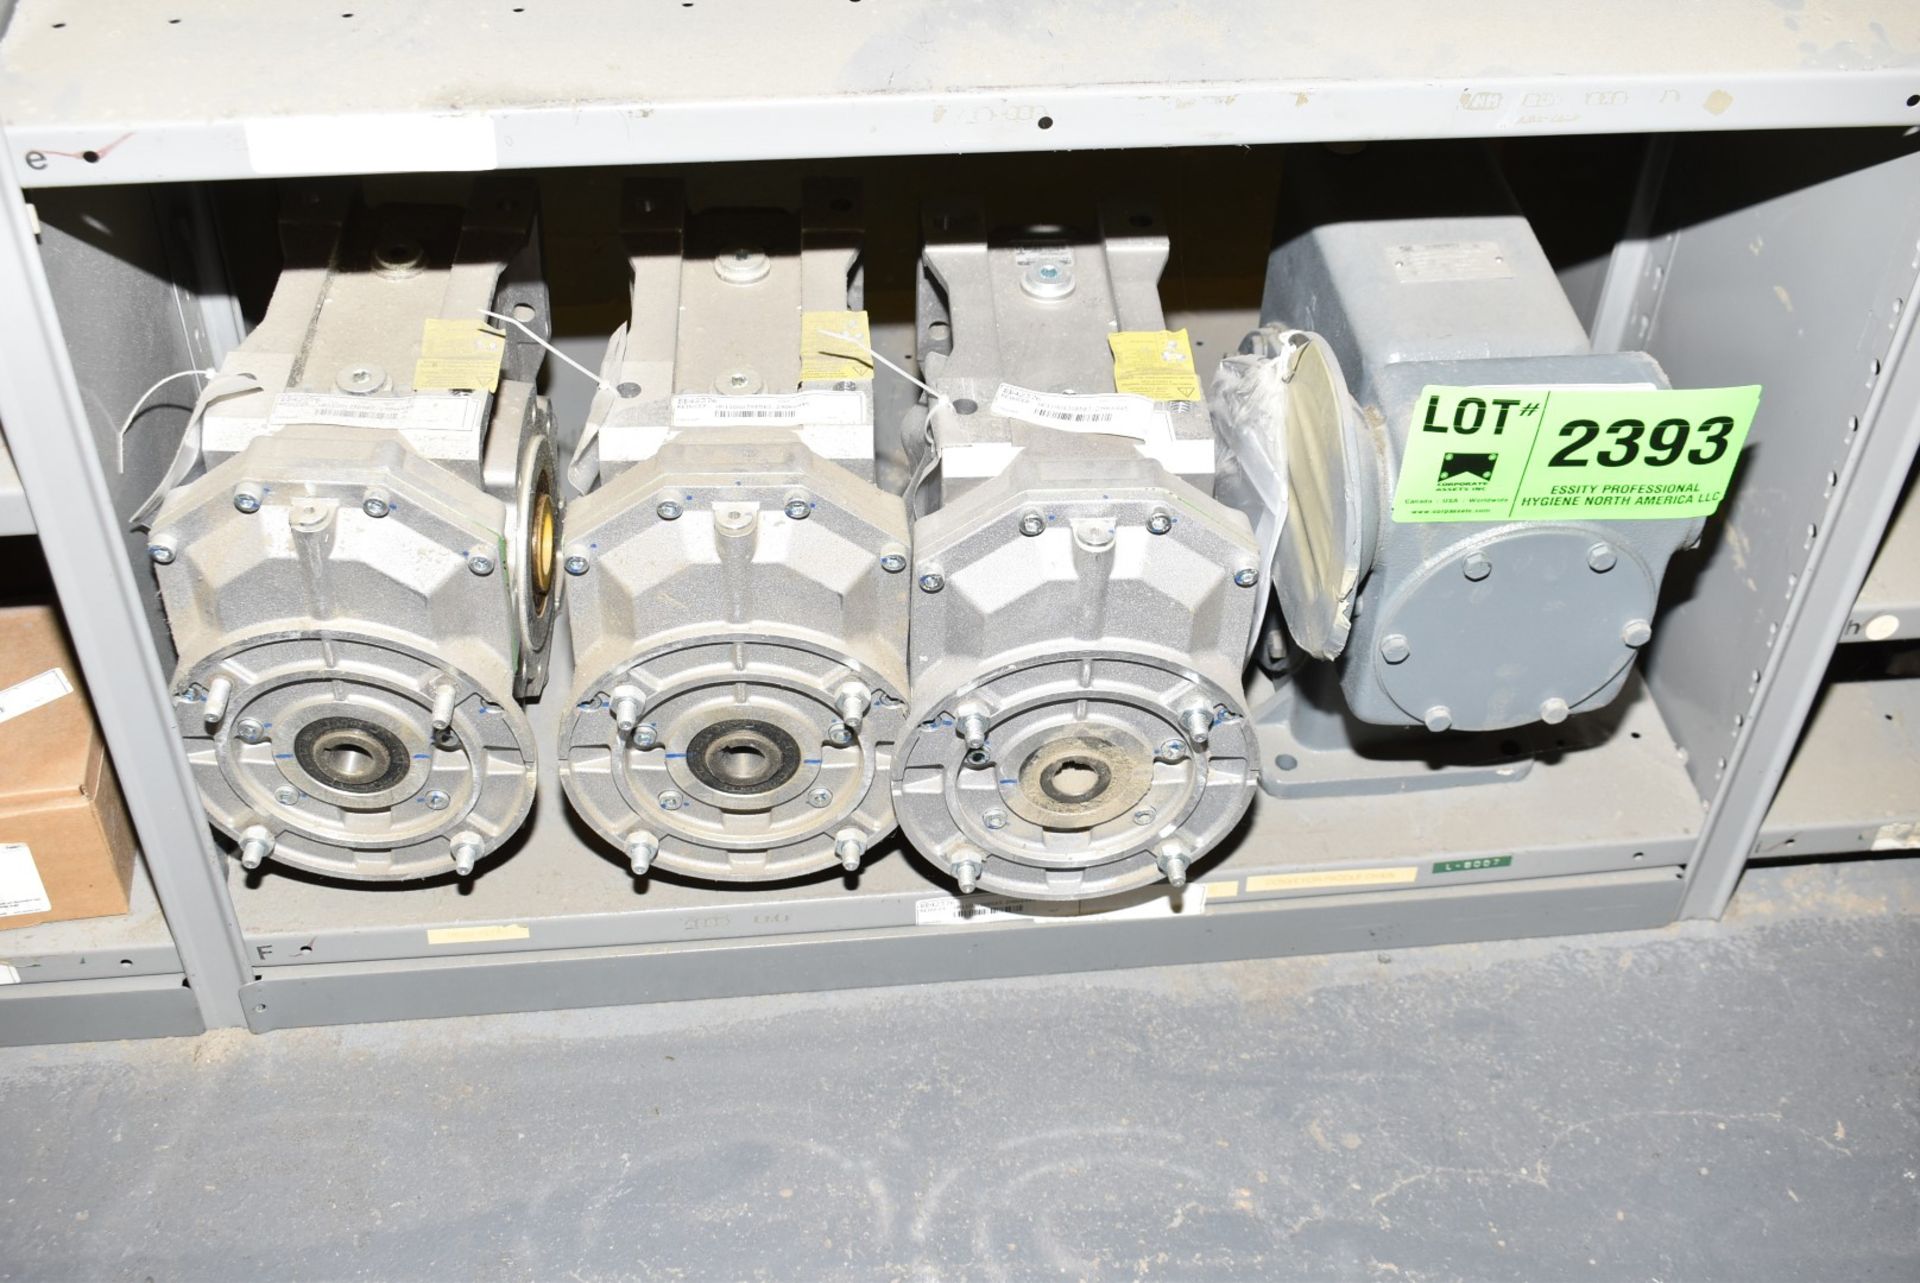 LOT/ CONTENTS OF SHELF - (4) GEAR REDUCERS [RIGGING FEES FOR LOT #2393 - $TBD USD PLUS APPLICABLE